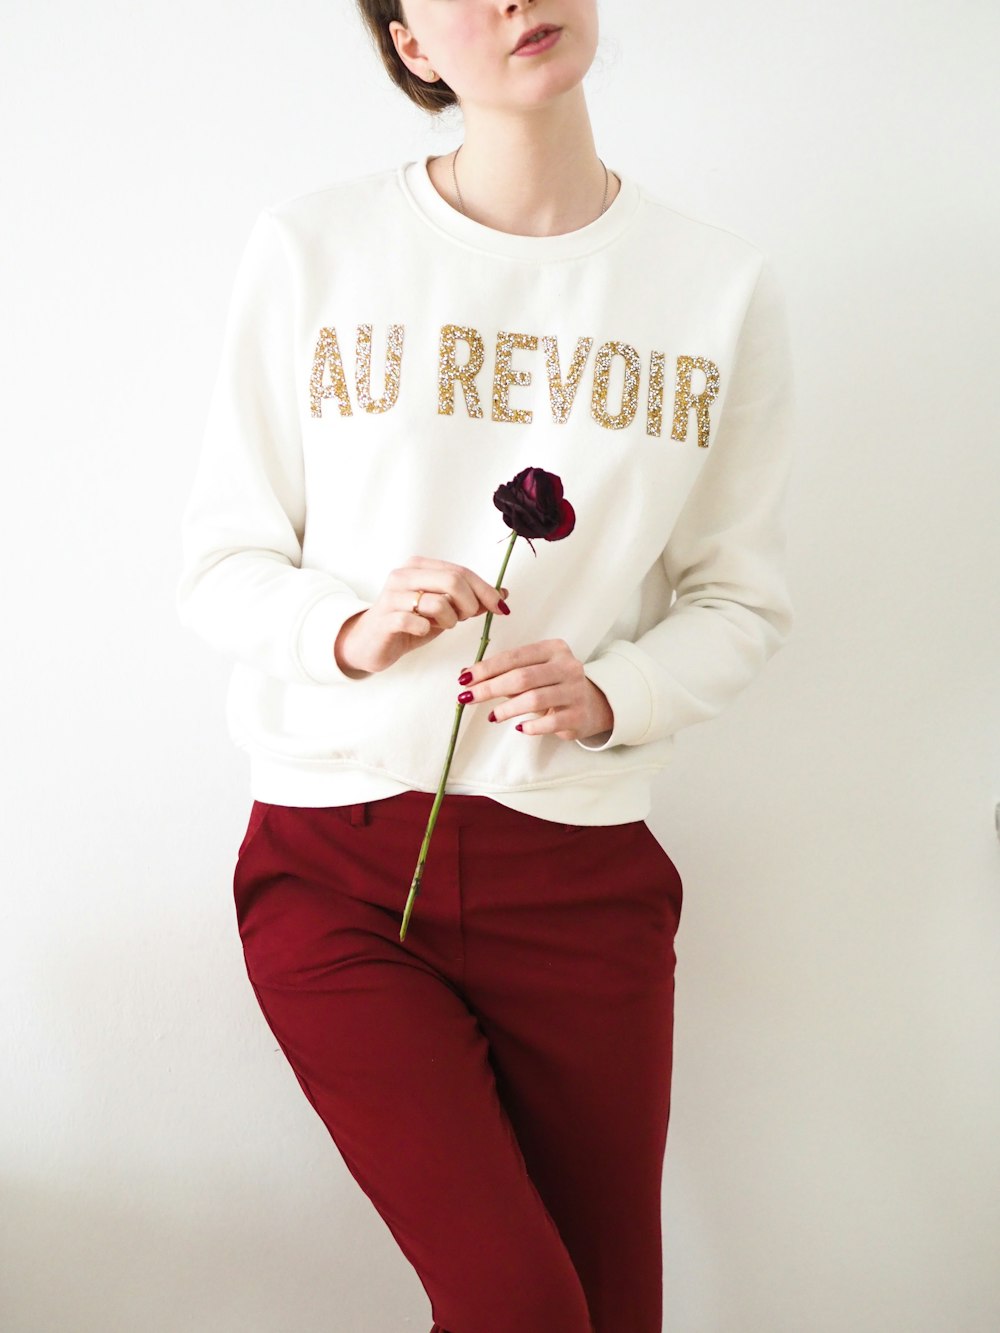 woman in white sweater and red pants holding black and white lollipop